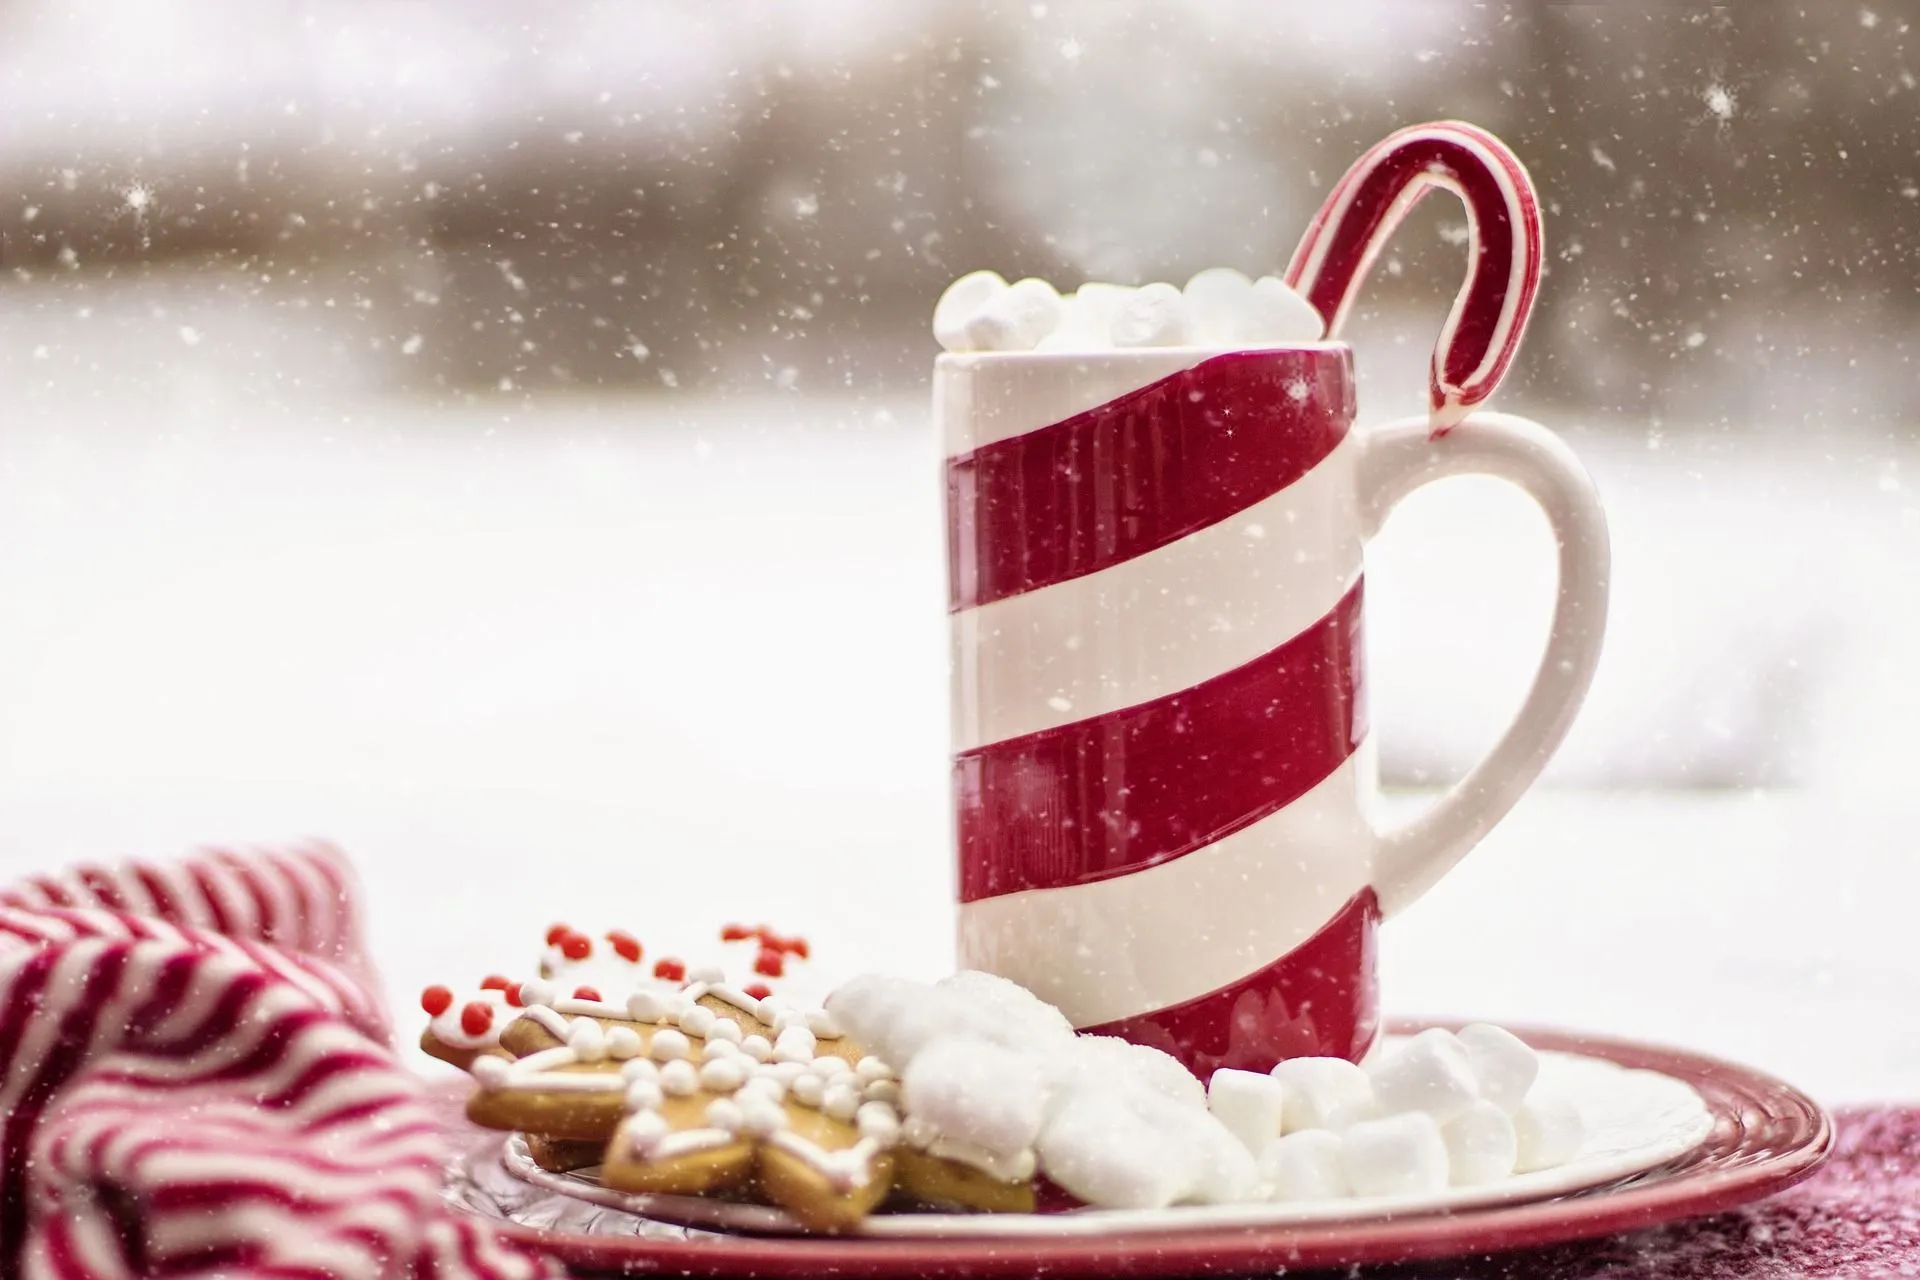 Drink a hot chocolate drink and celebrate with your loved ones!